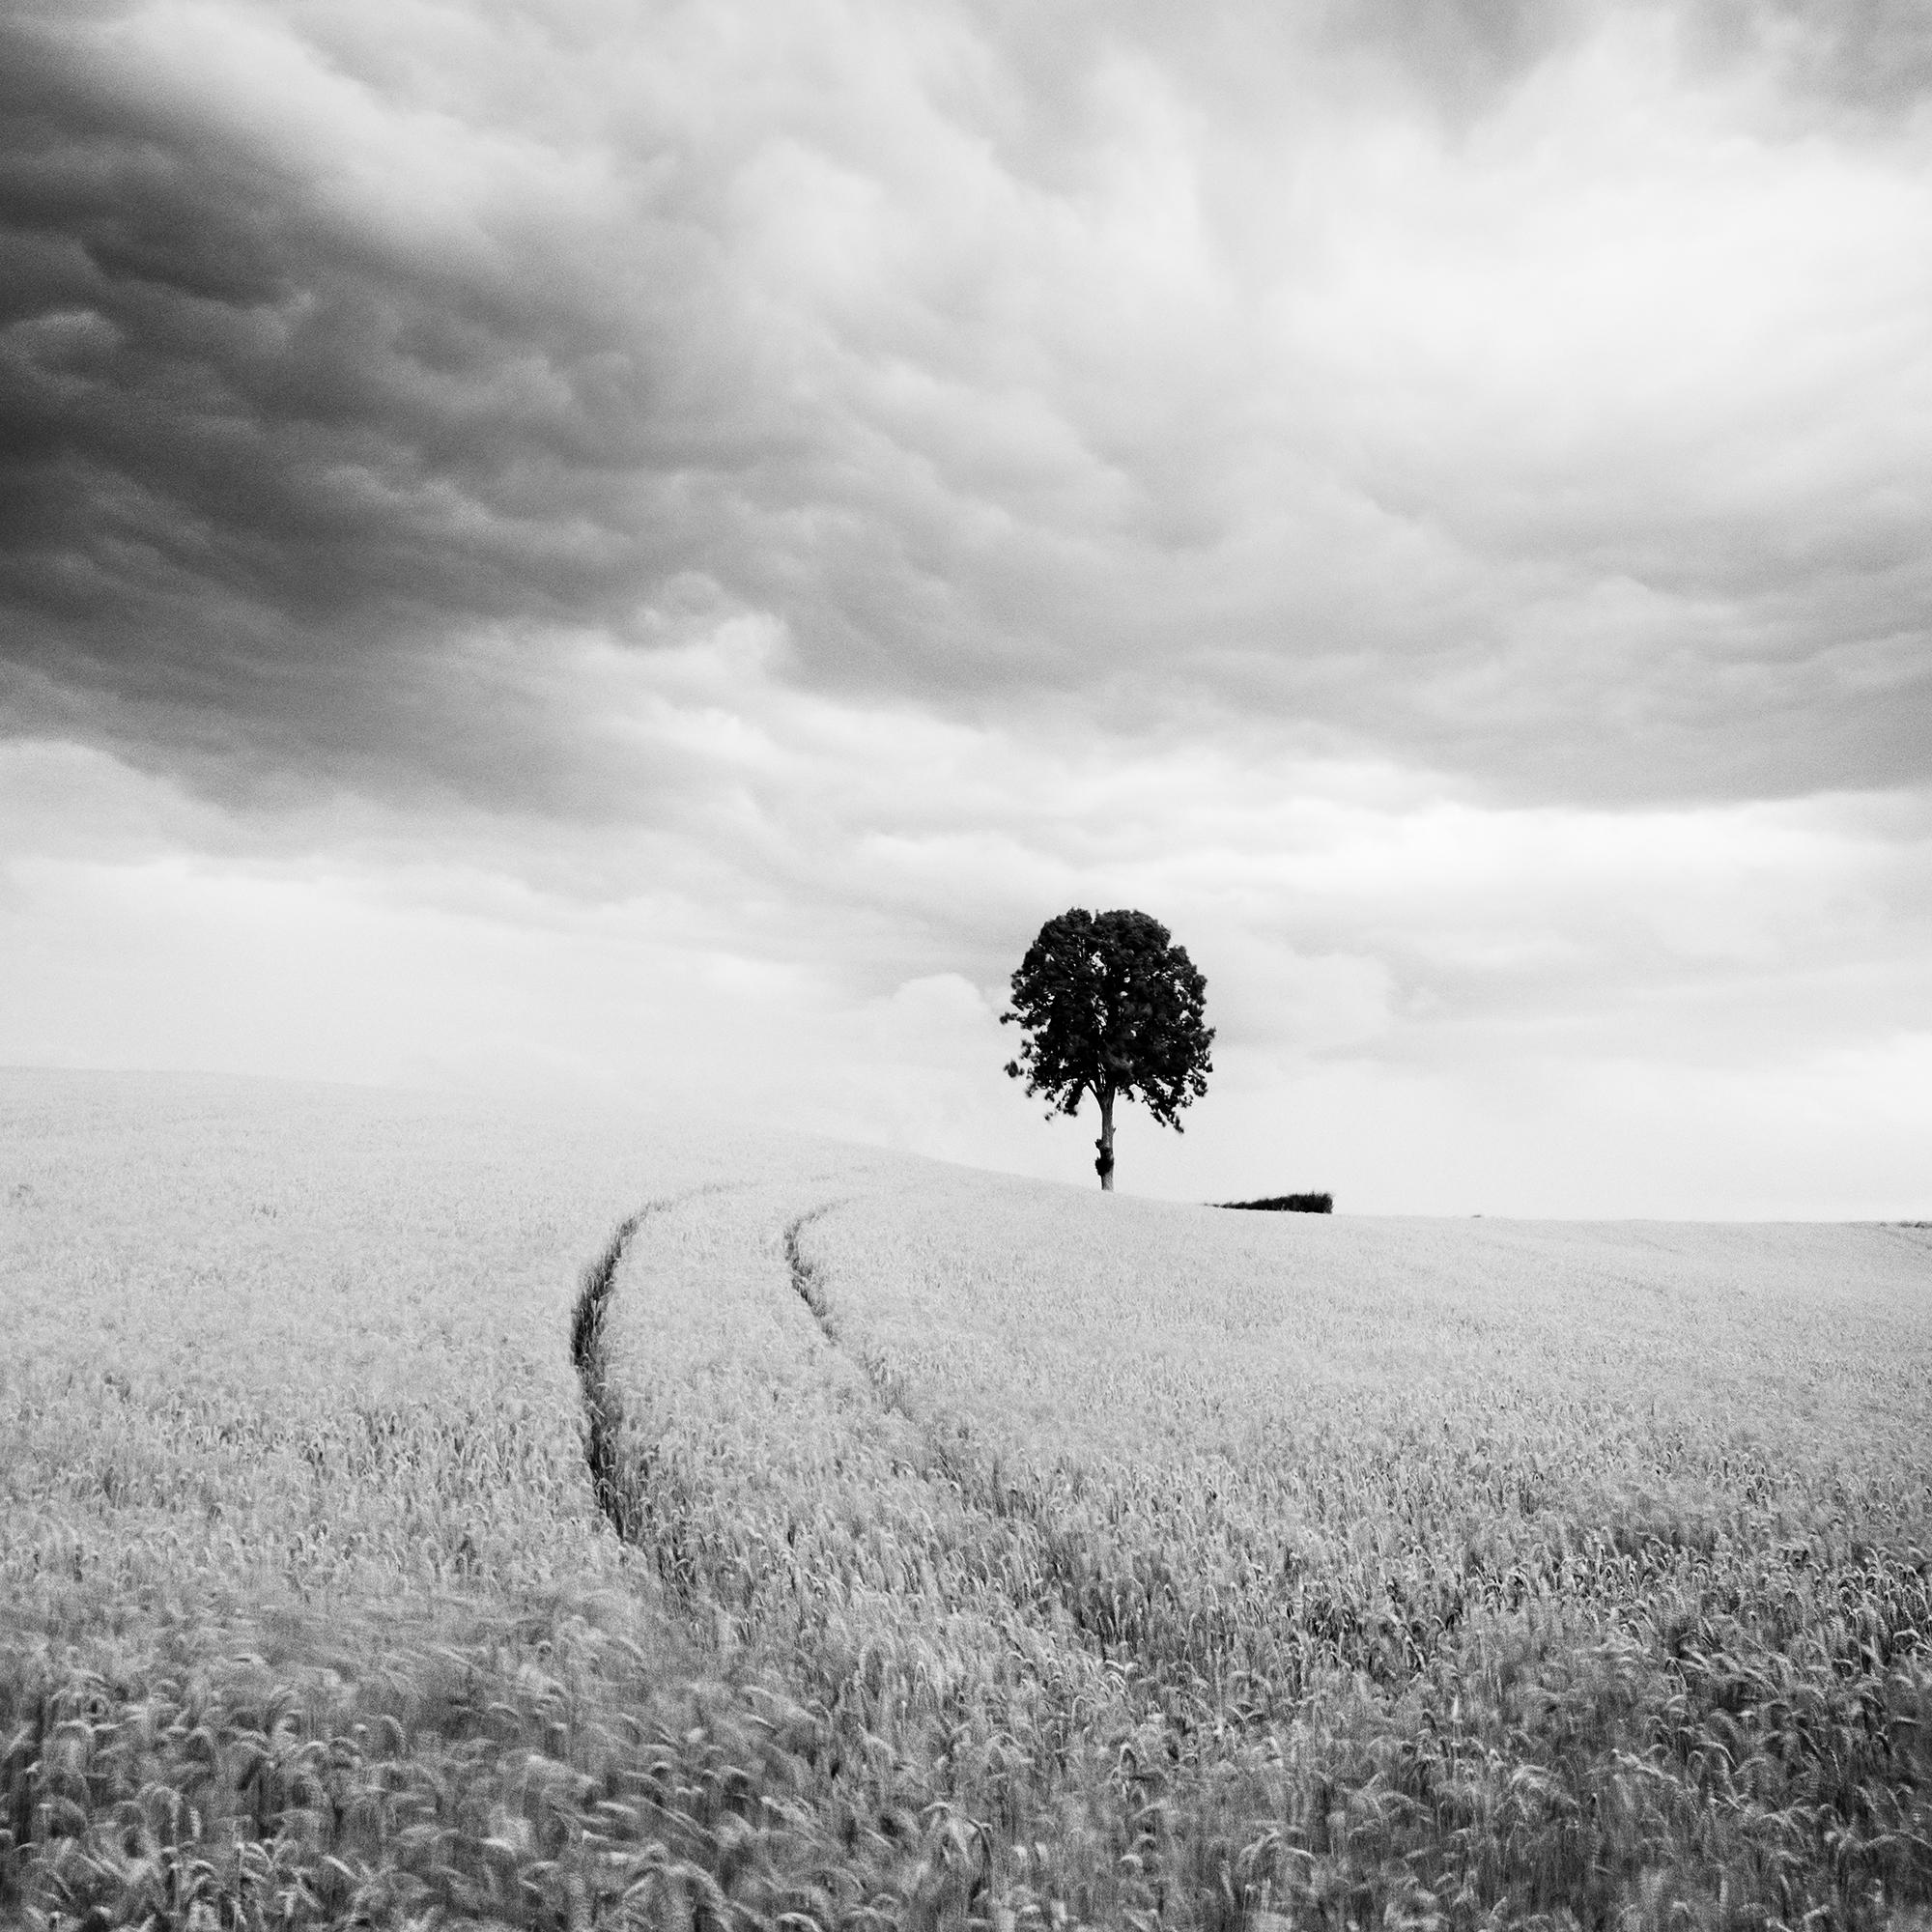 Black and white fine art landscape photography. Single tree in the cornfield during a storm and giant clouds, Austria. Archival pigment ink print as part of a limited edition of 15. All Gerald Berghammer prints are made to order in limited editions